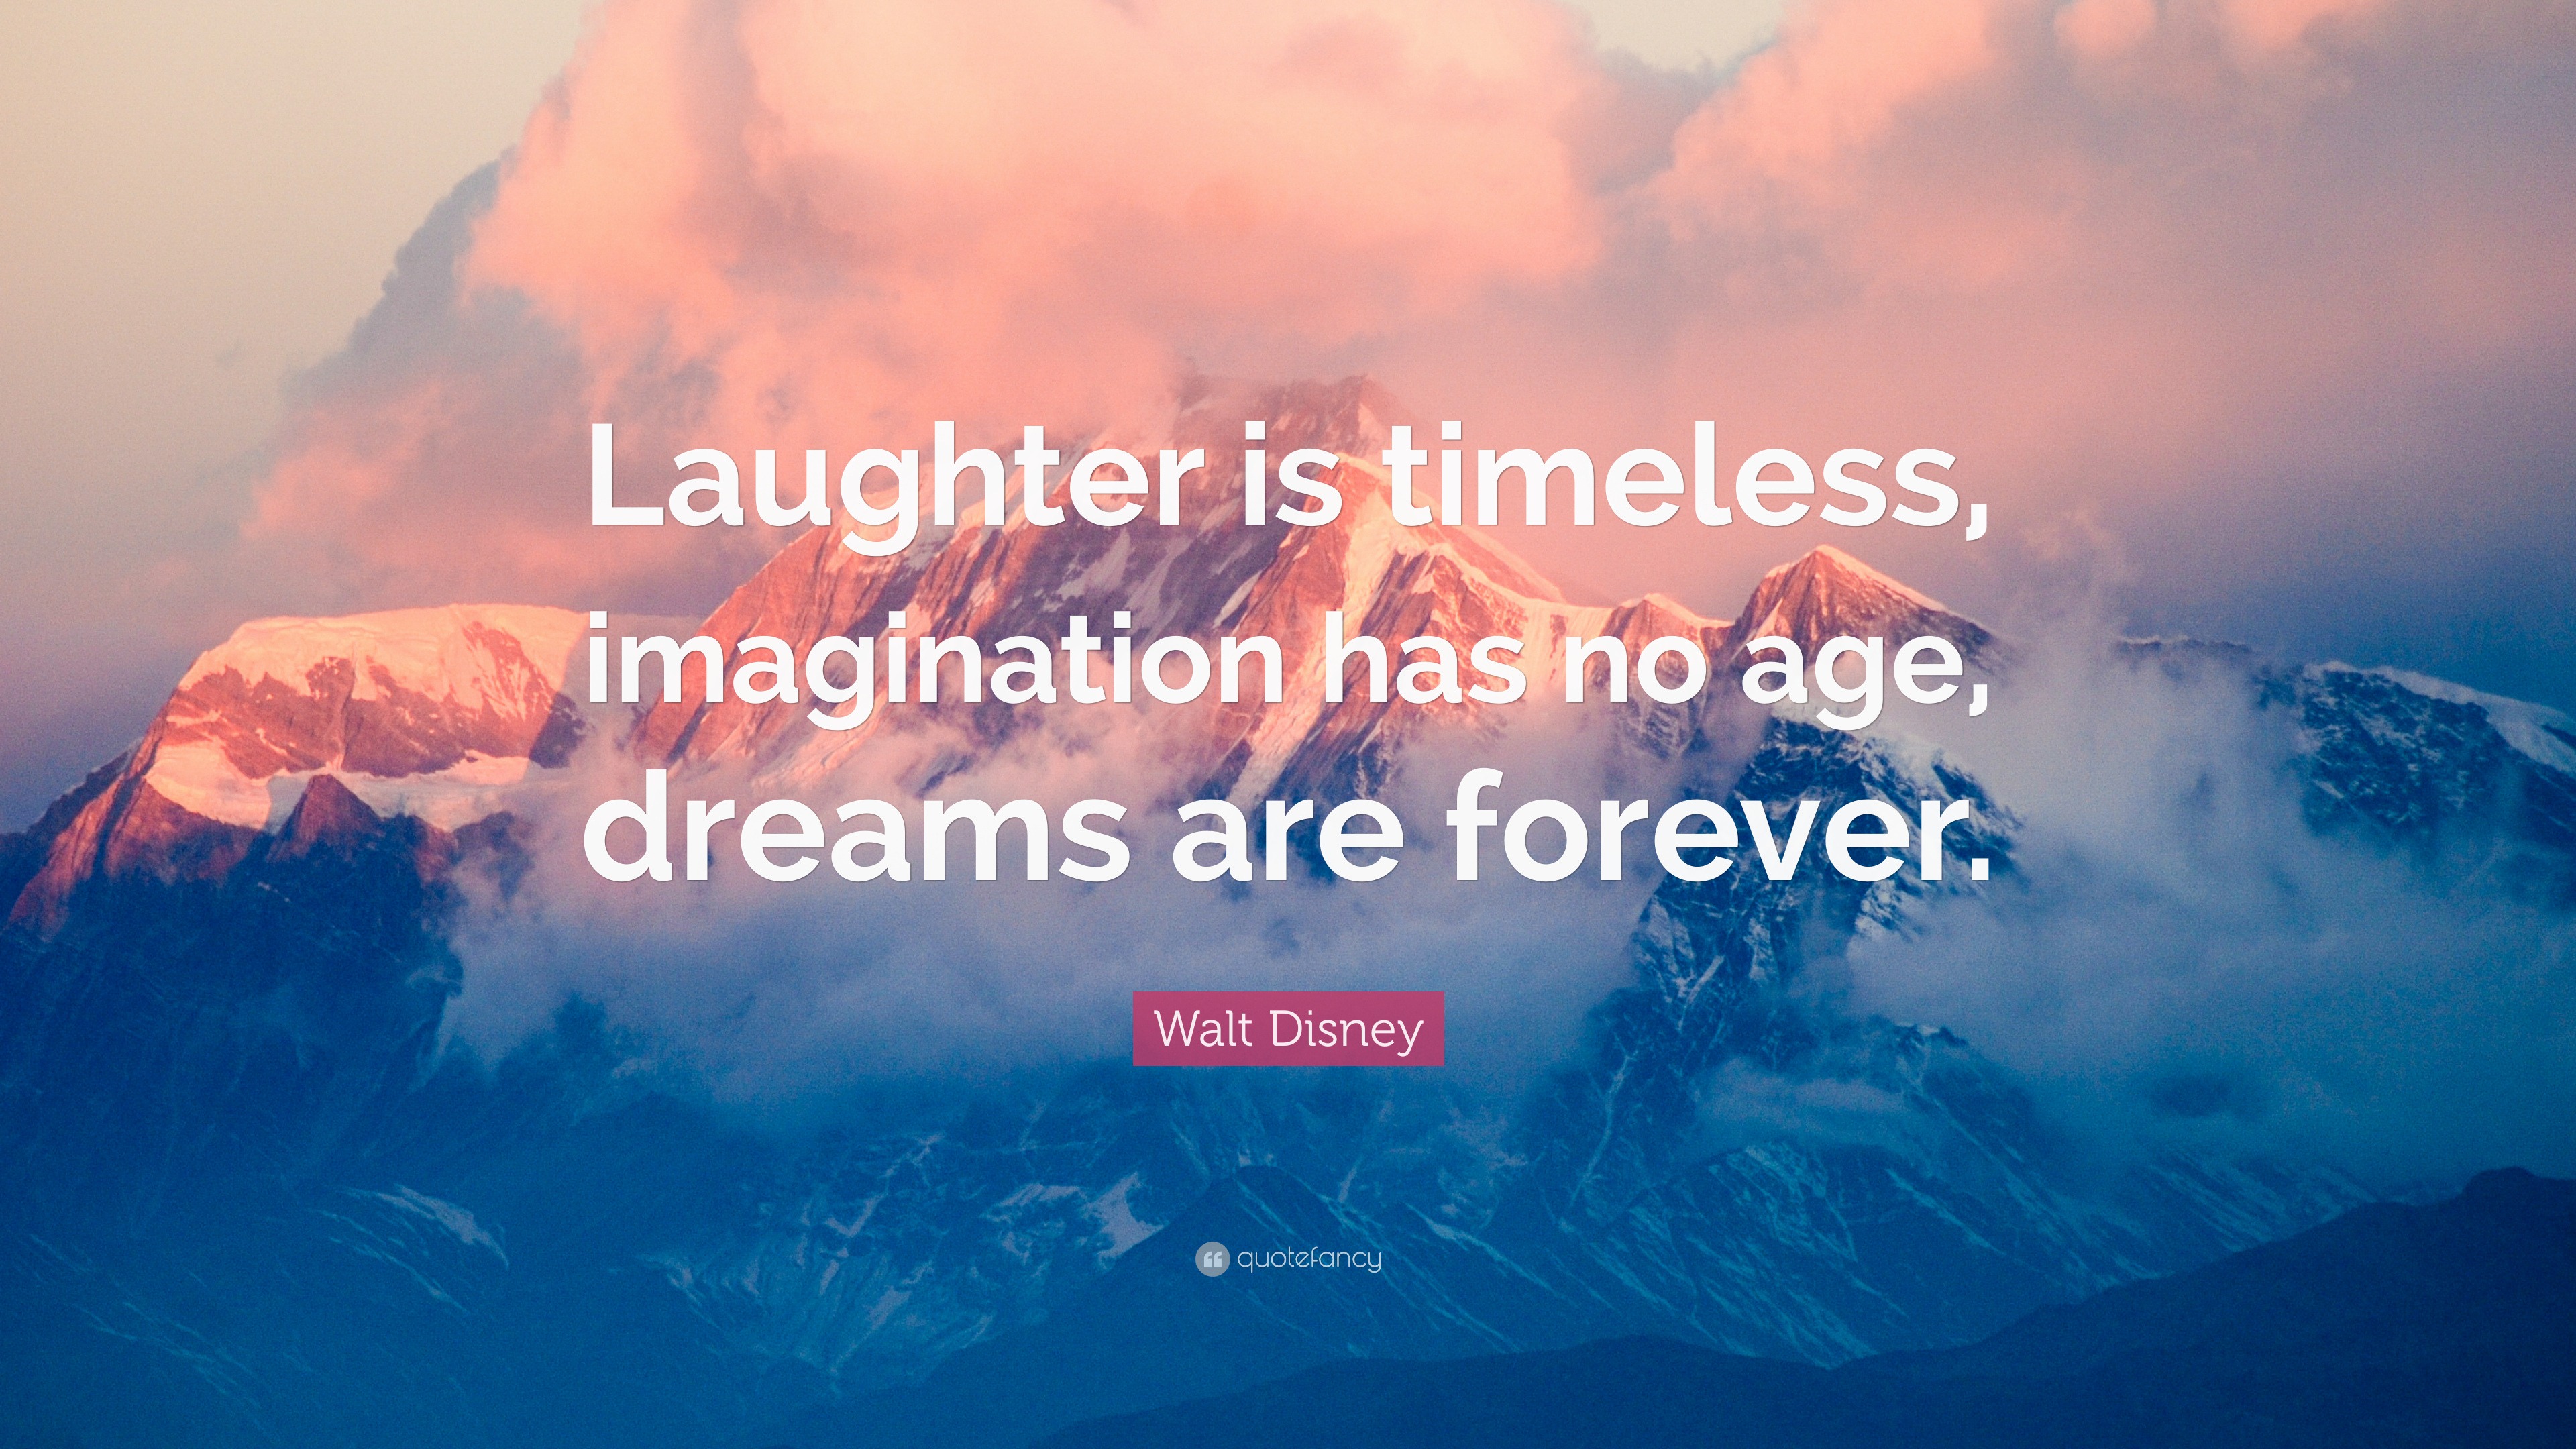 laughter is timeless, imagination has no age